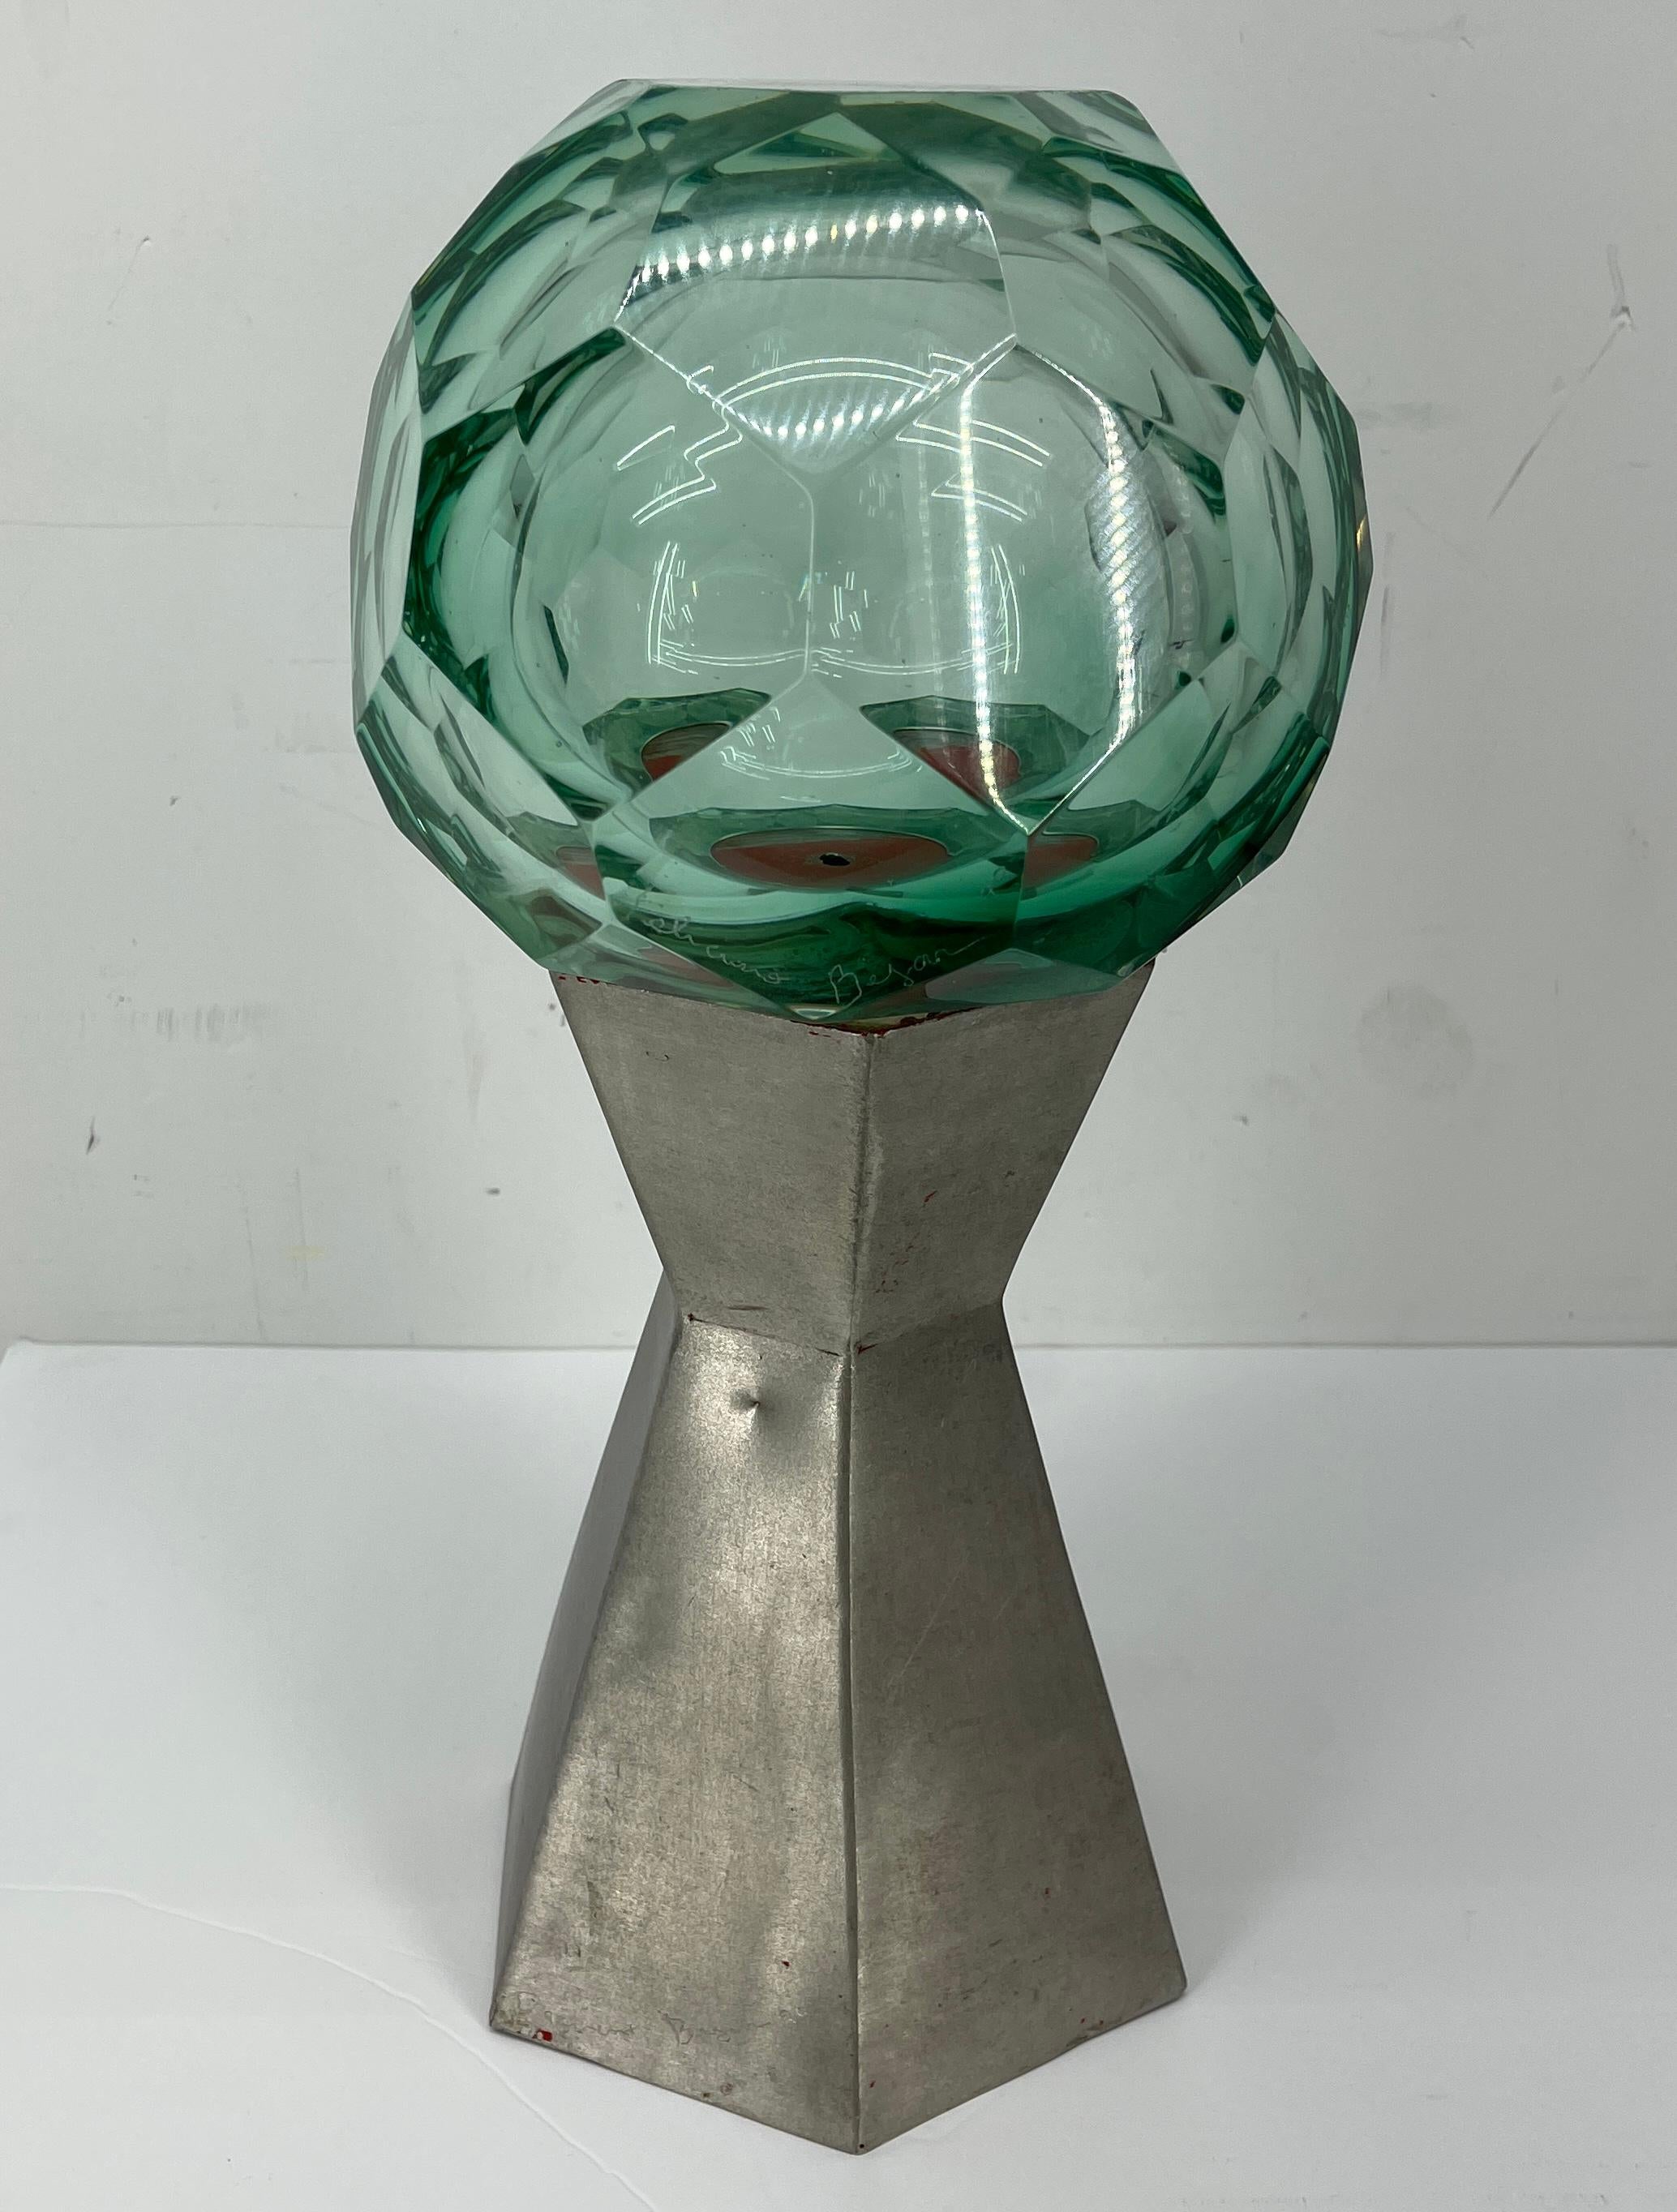 Cut glass and brushed aluminum table sculpture by Feliciano Béjar (1920-2007), Mexico, 1990's. 
His art sculptures dating from the 1960's through 1990's uses glass ground with either optic bubbles or beveled surface on both sides of the glass,